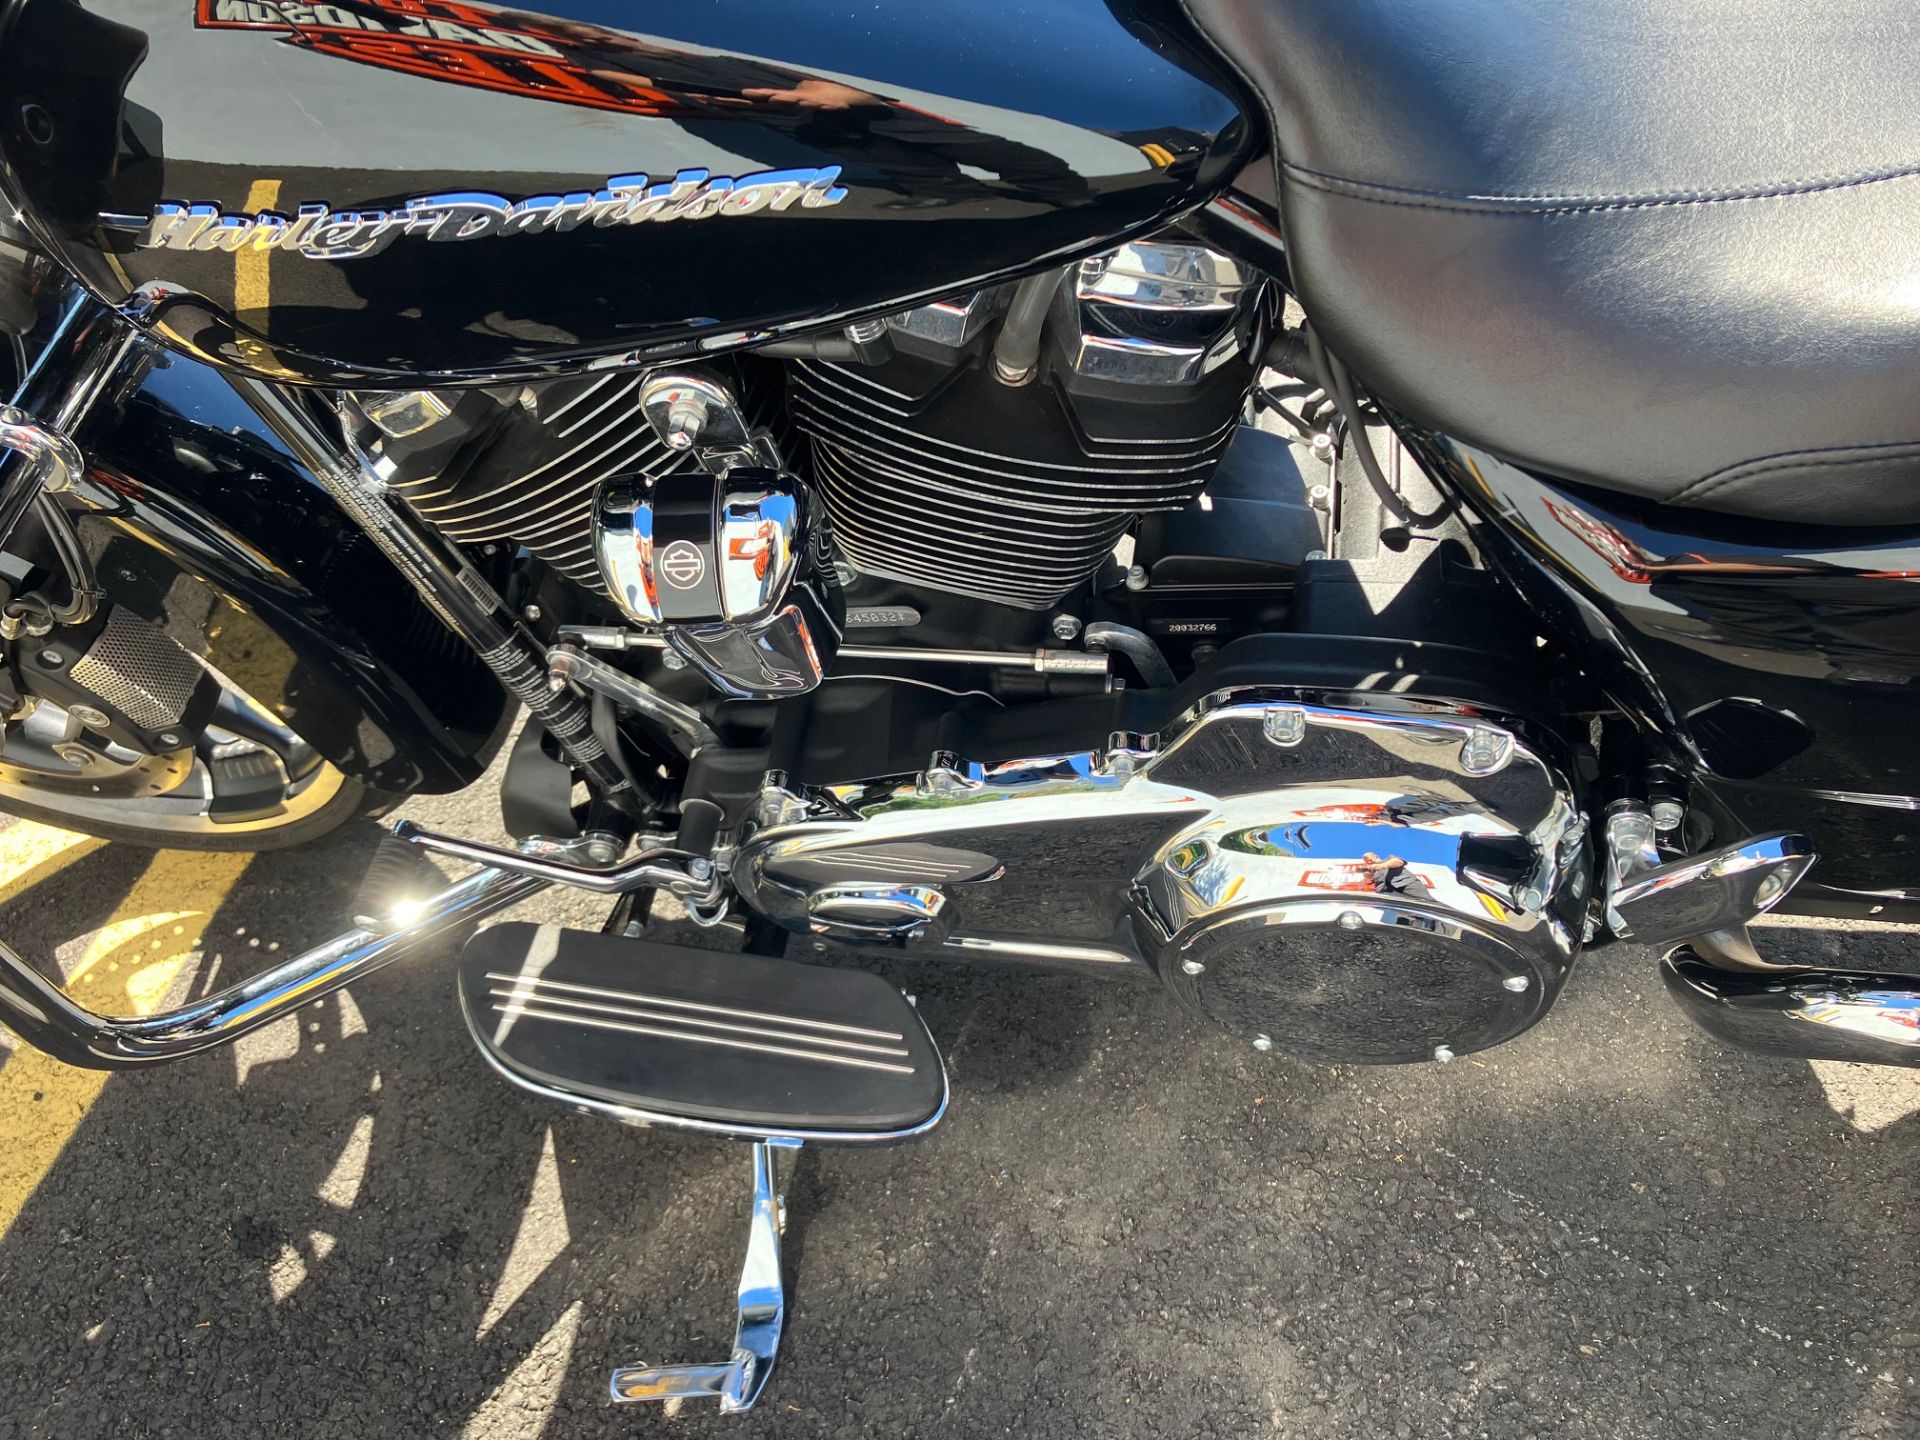 2020 Harley-Davidson ROAD GLIDE in West Long Branch, New Jersey - Photo 13